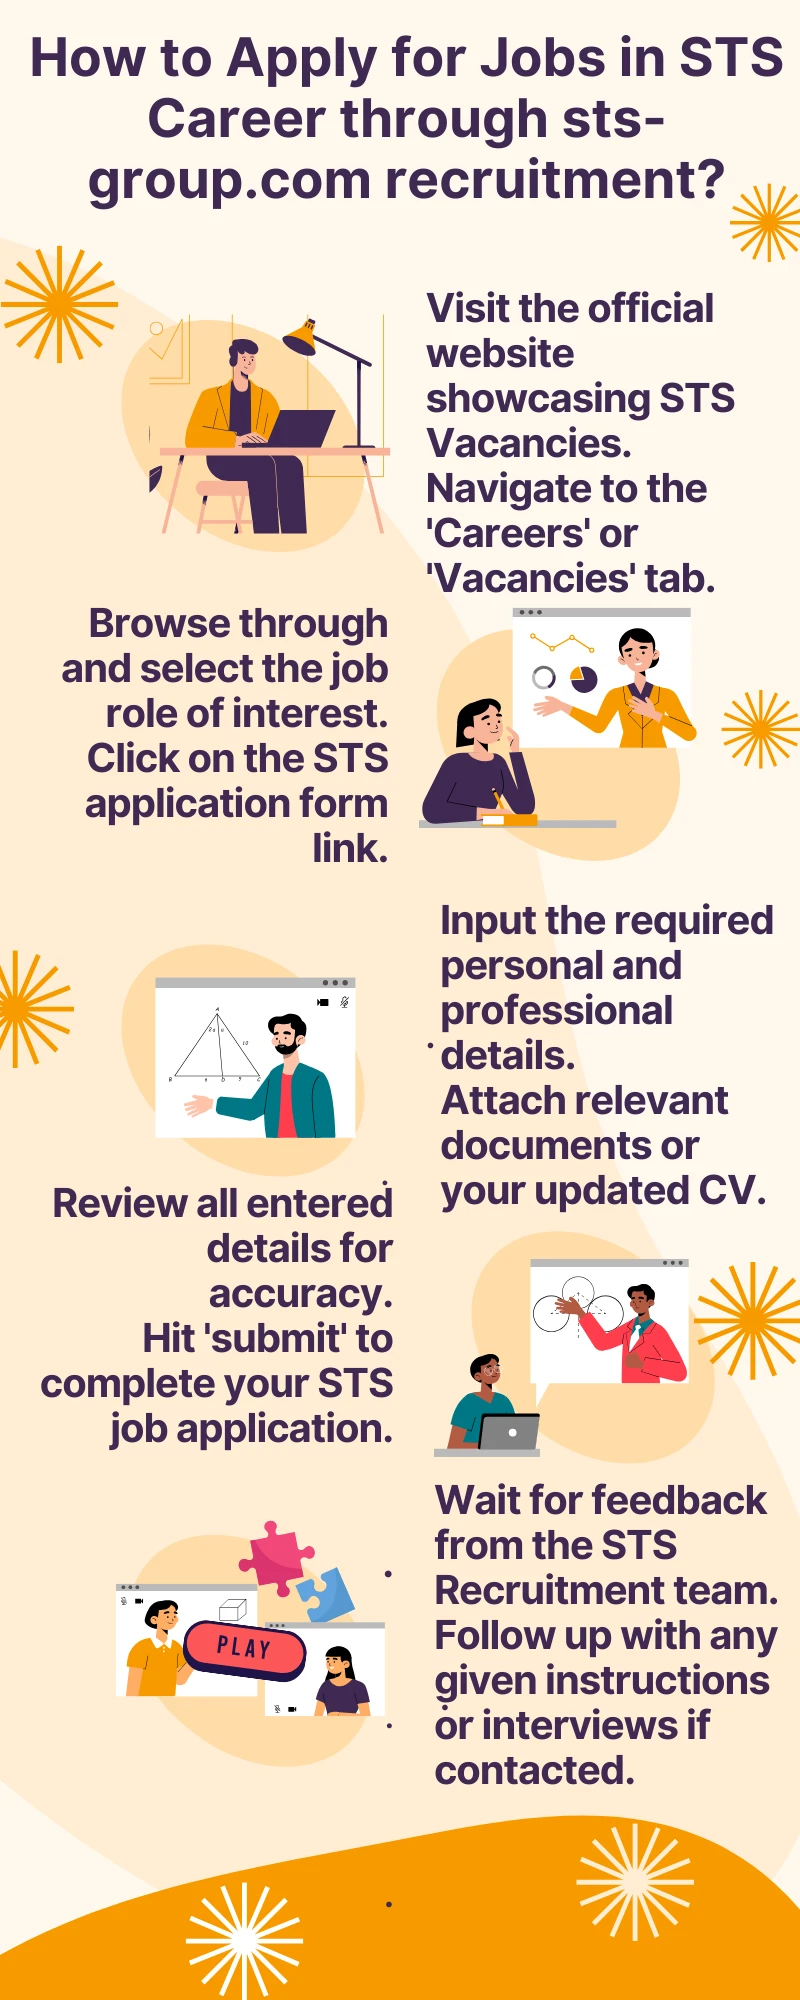 How to Apply for Jobs in STS Career through sts-group.com recruitment_